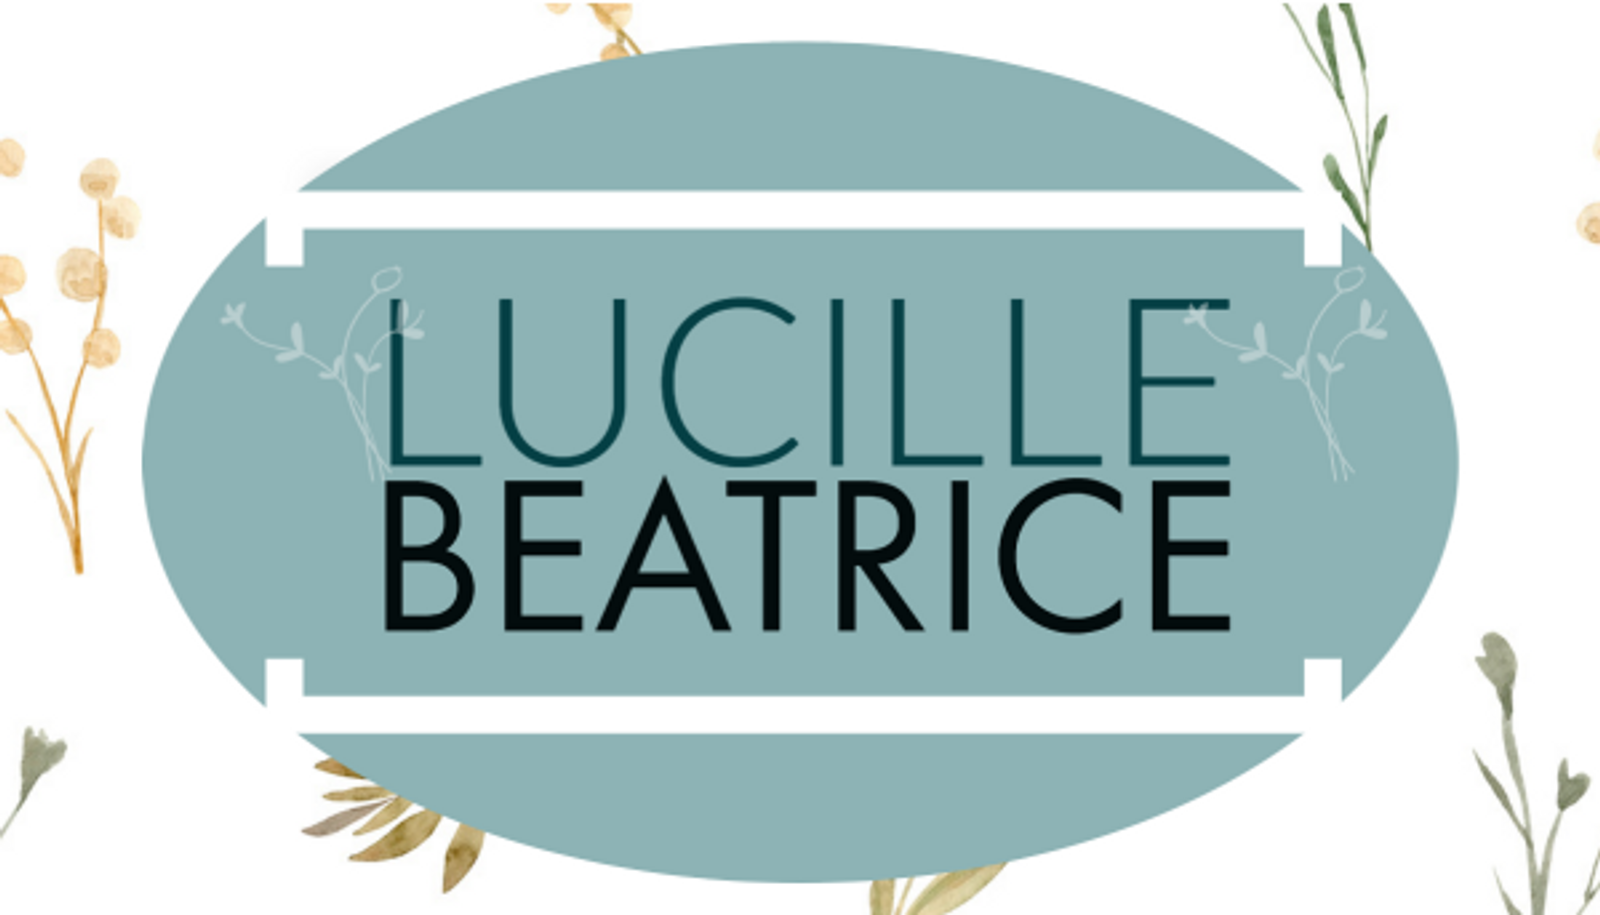 Lucille Beatrice images from live cam show